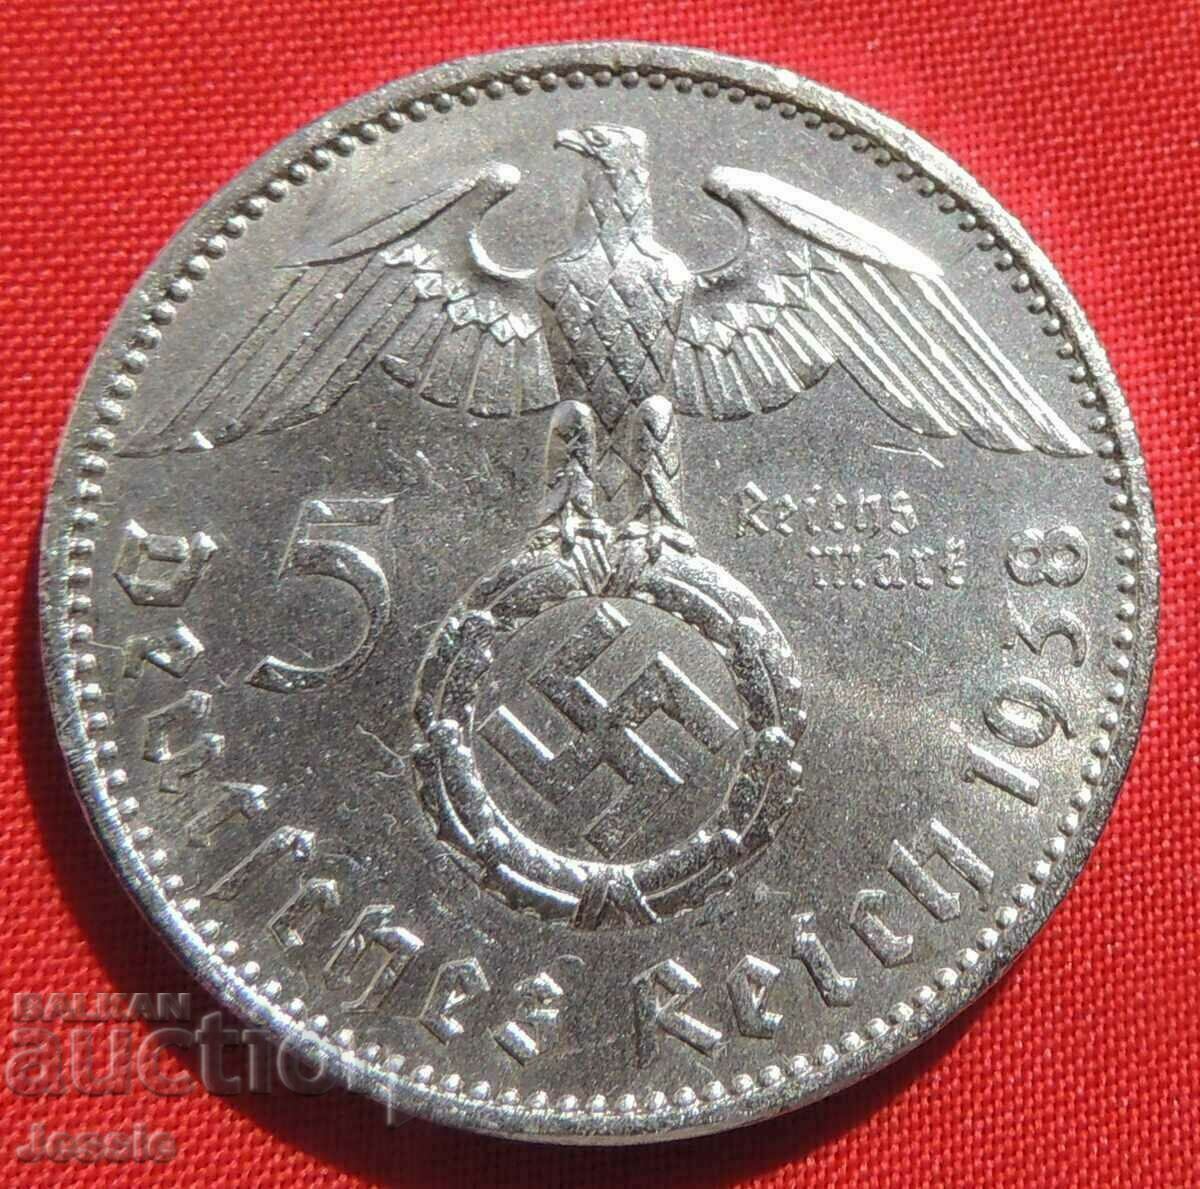 5 Reichsmarks 1938 A Germany silver